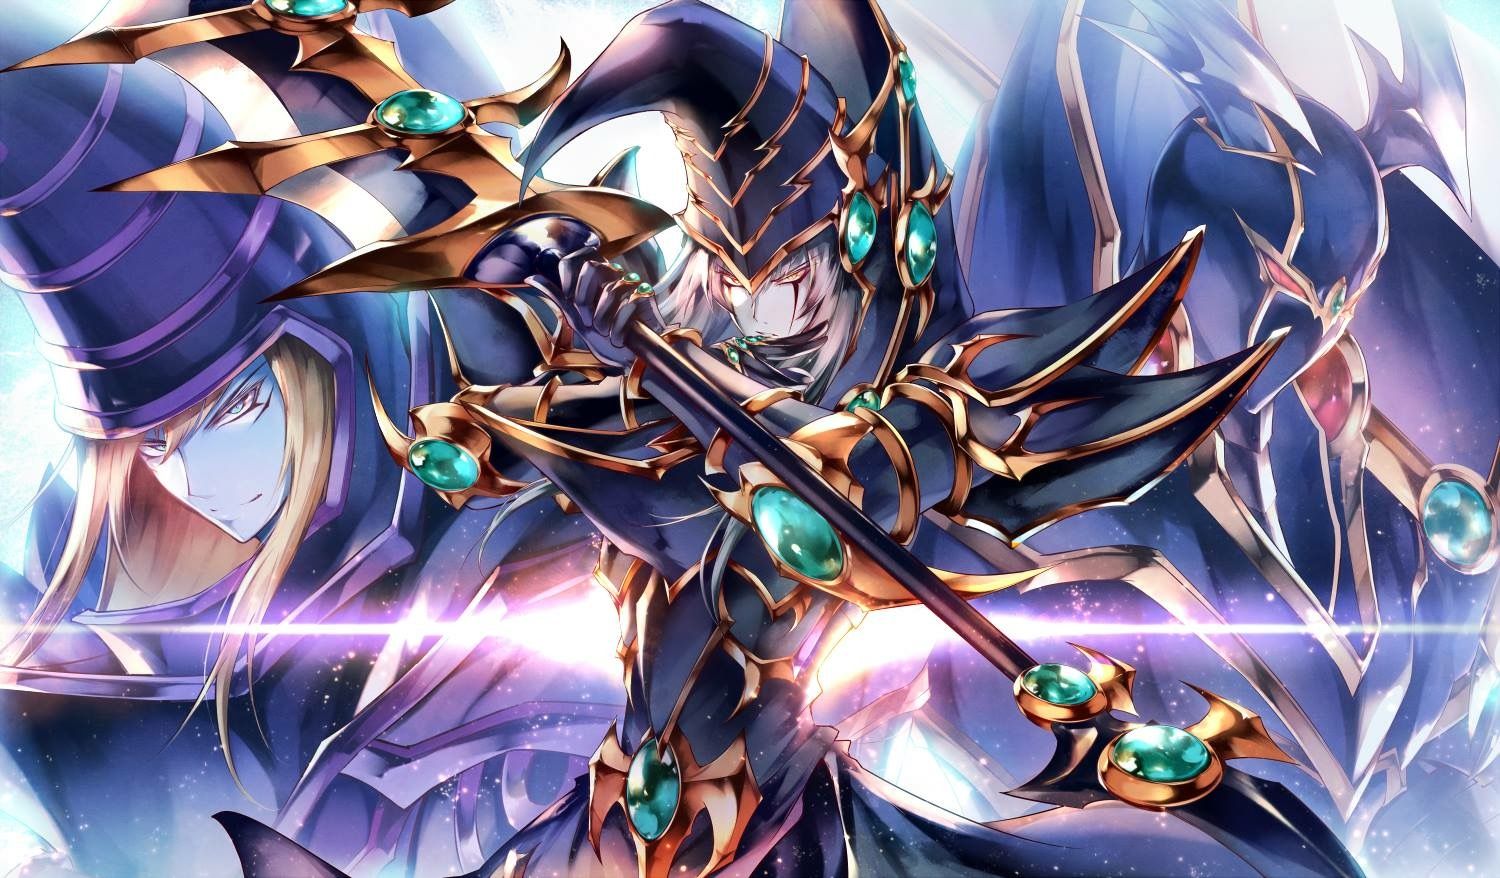 Mago Negro Yu Gi Oh Wallpapers Hd posted by Samantha Thompson.